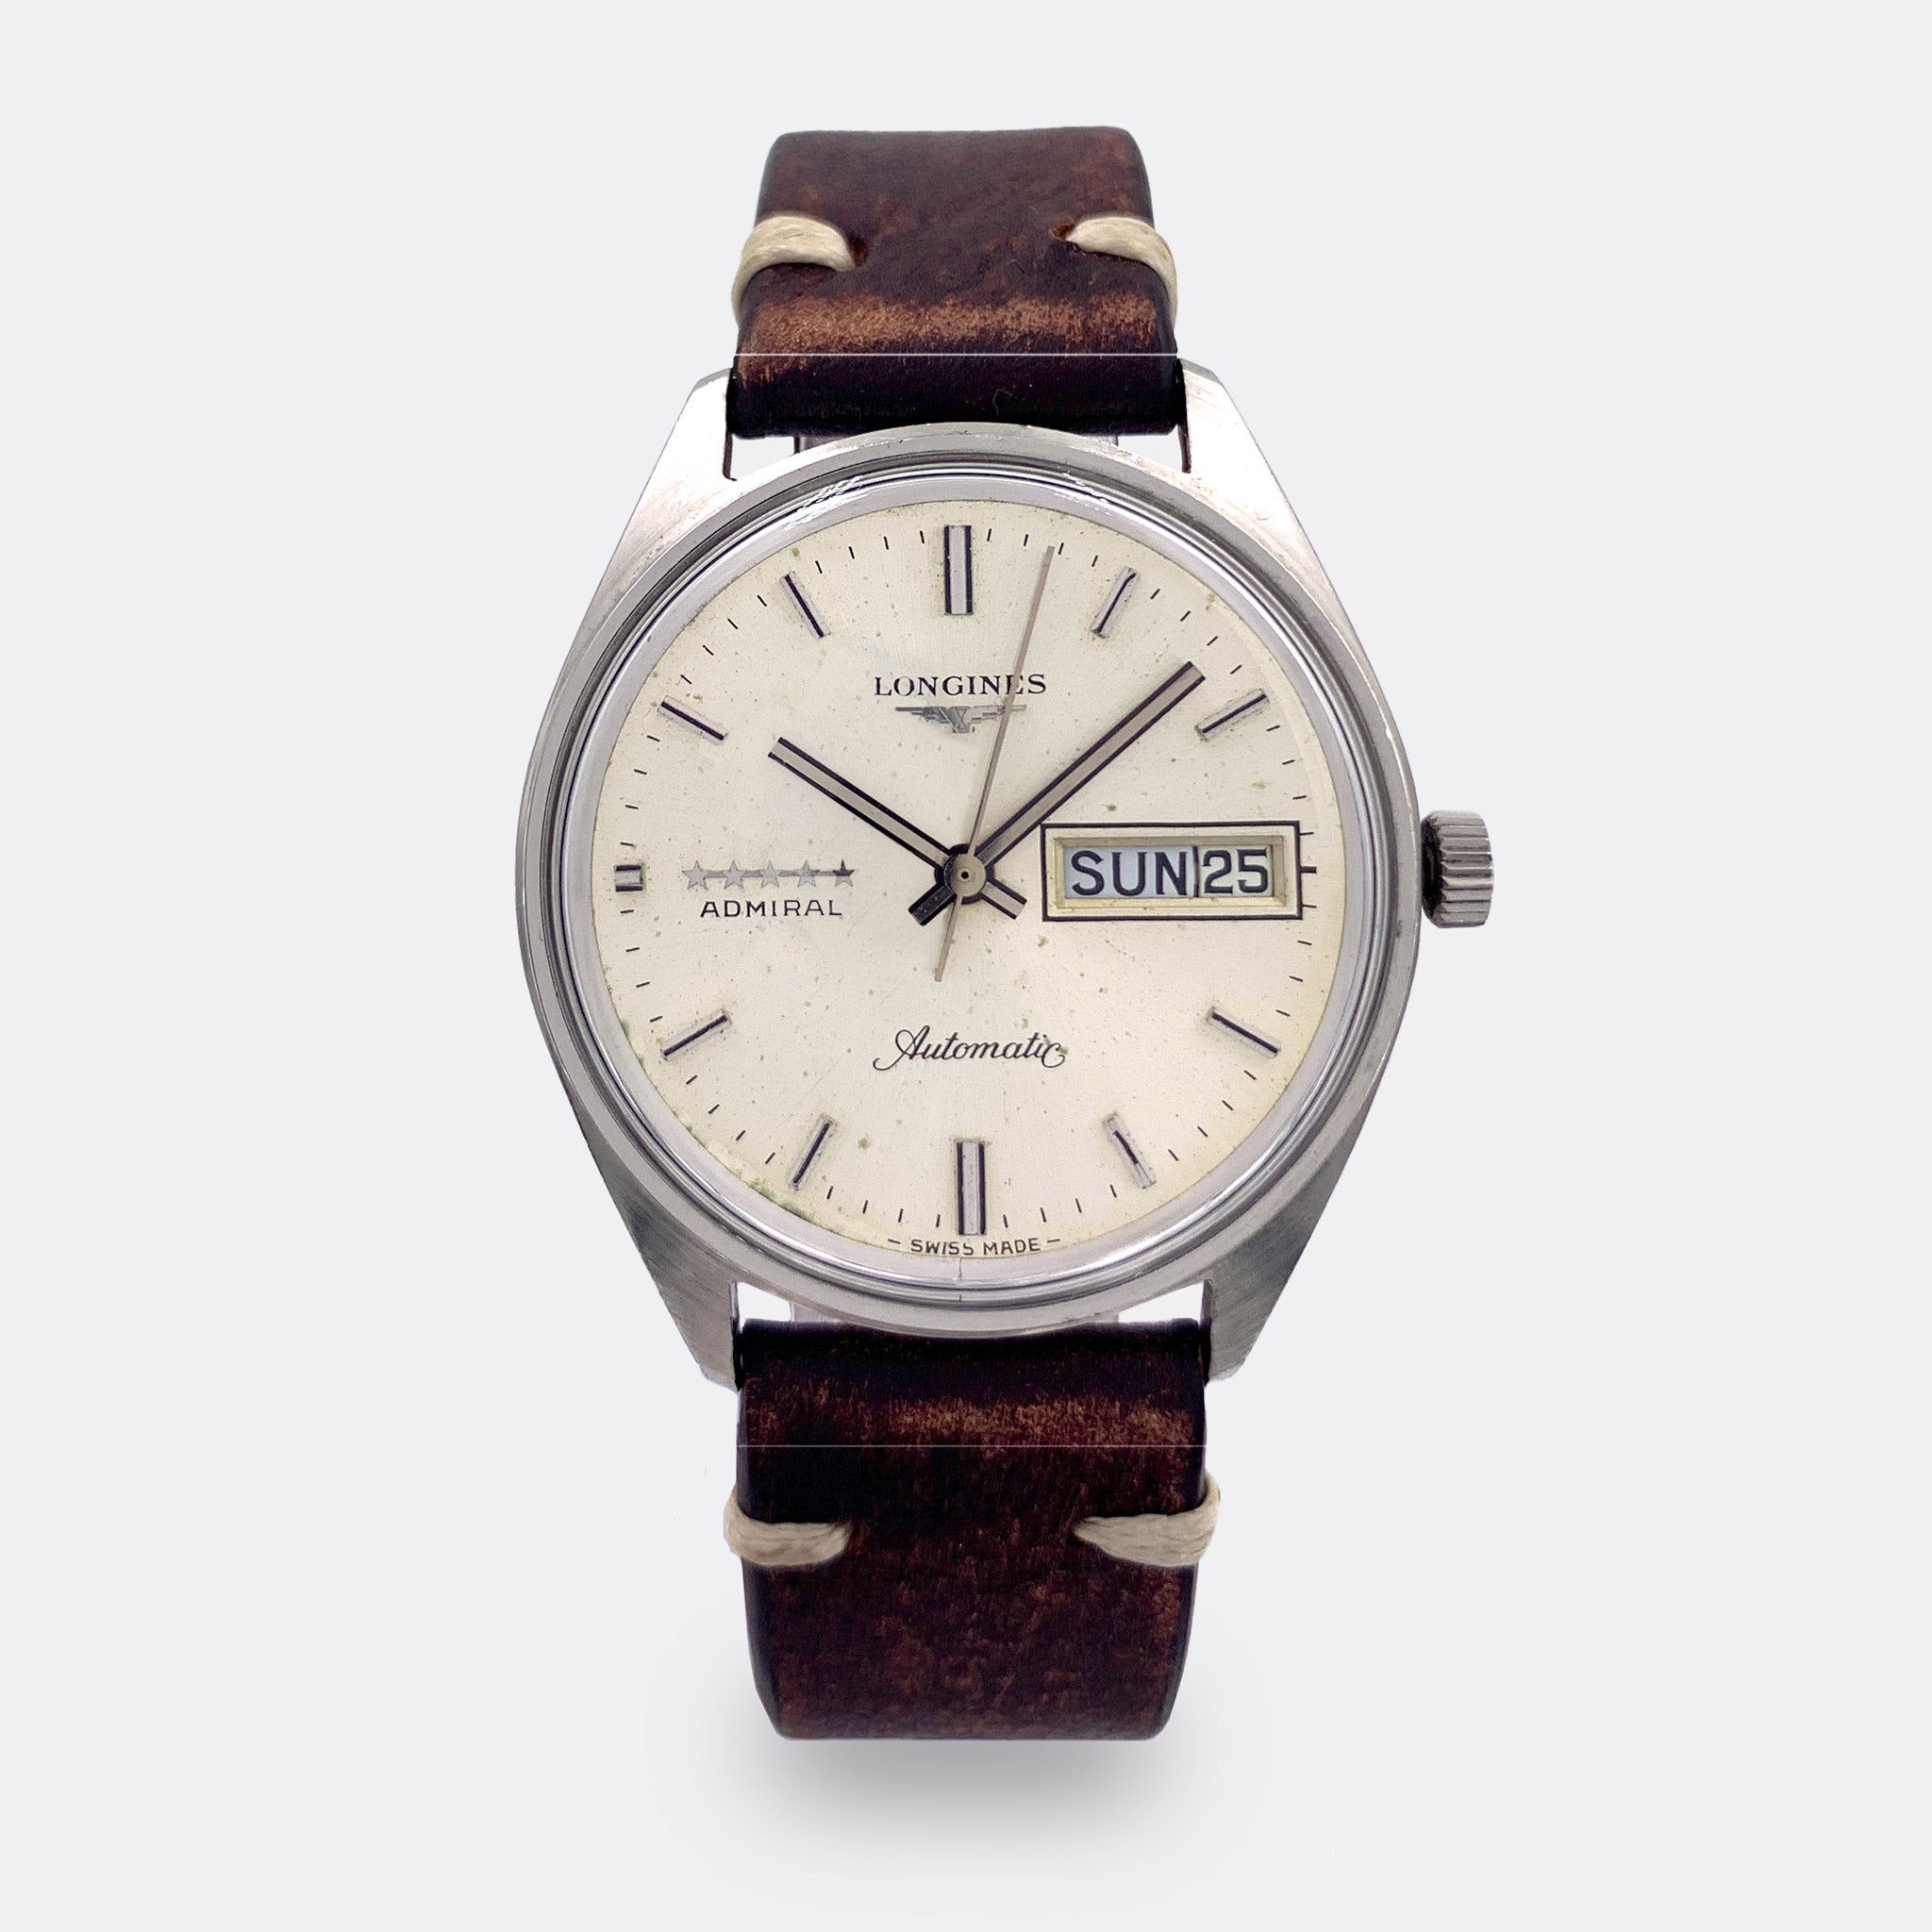 LONGINES | Admiral 5 Star | Day-Date | Silver Sunburst Dial | 1970s